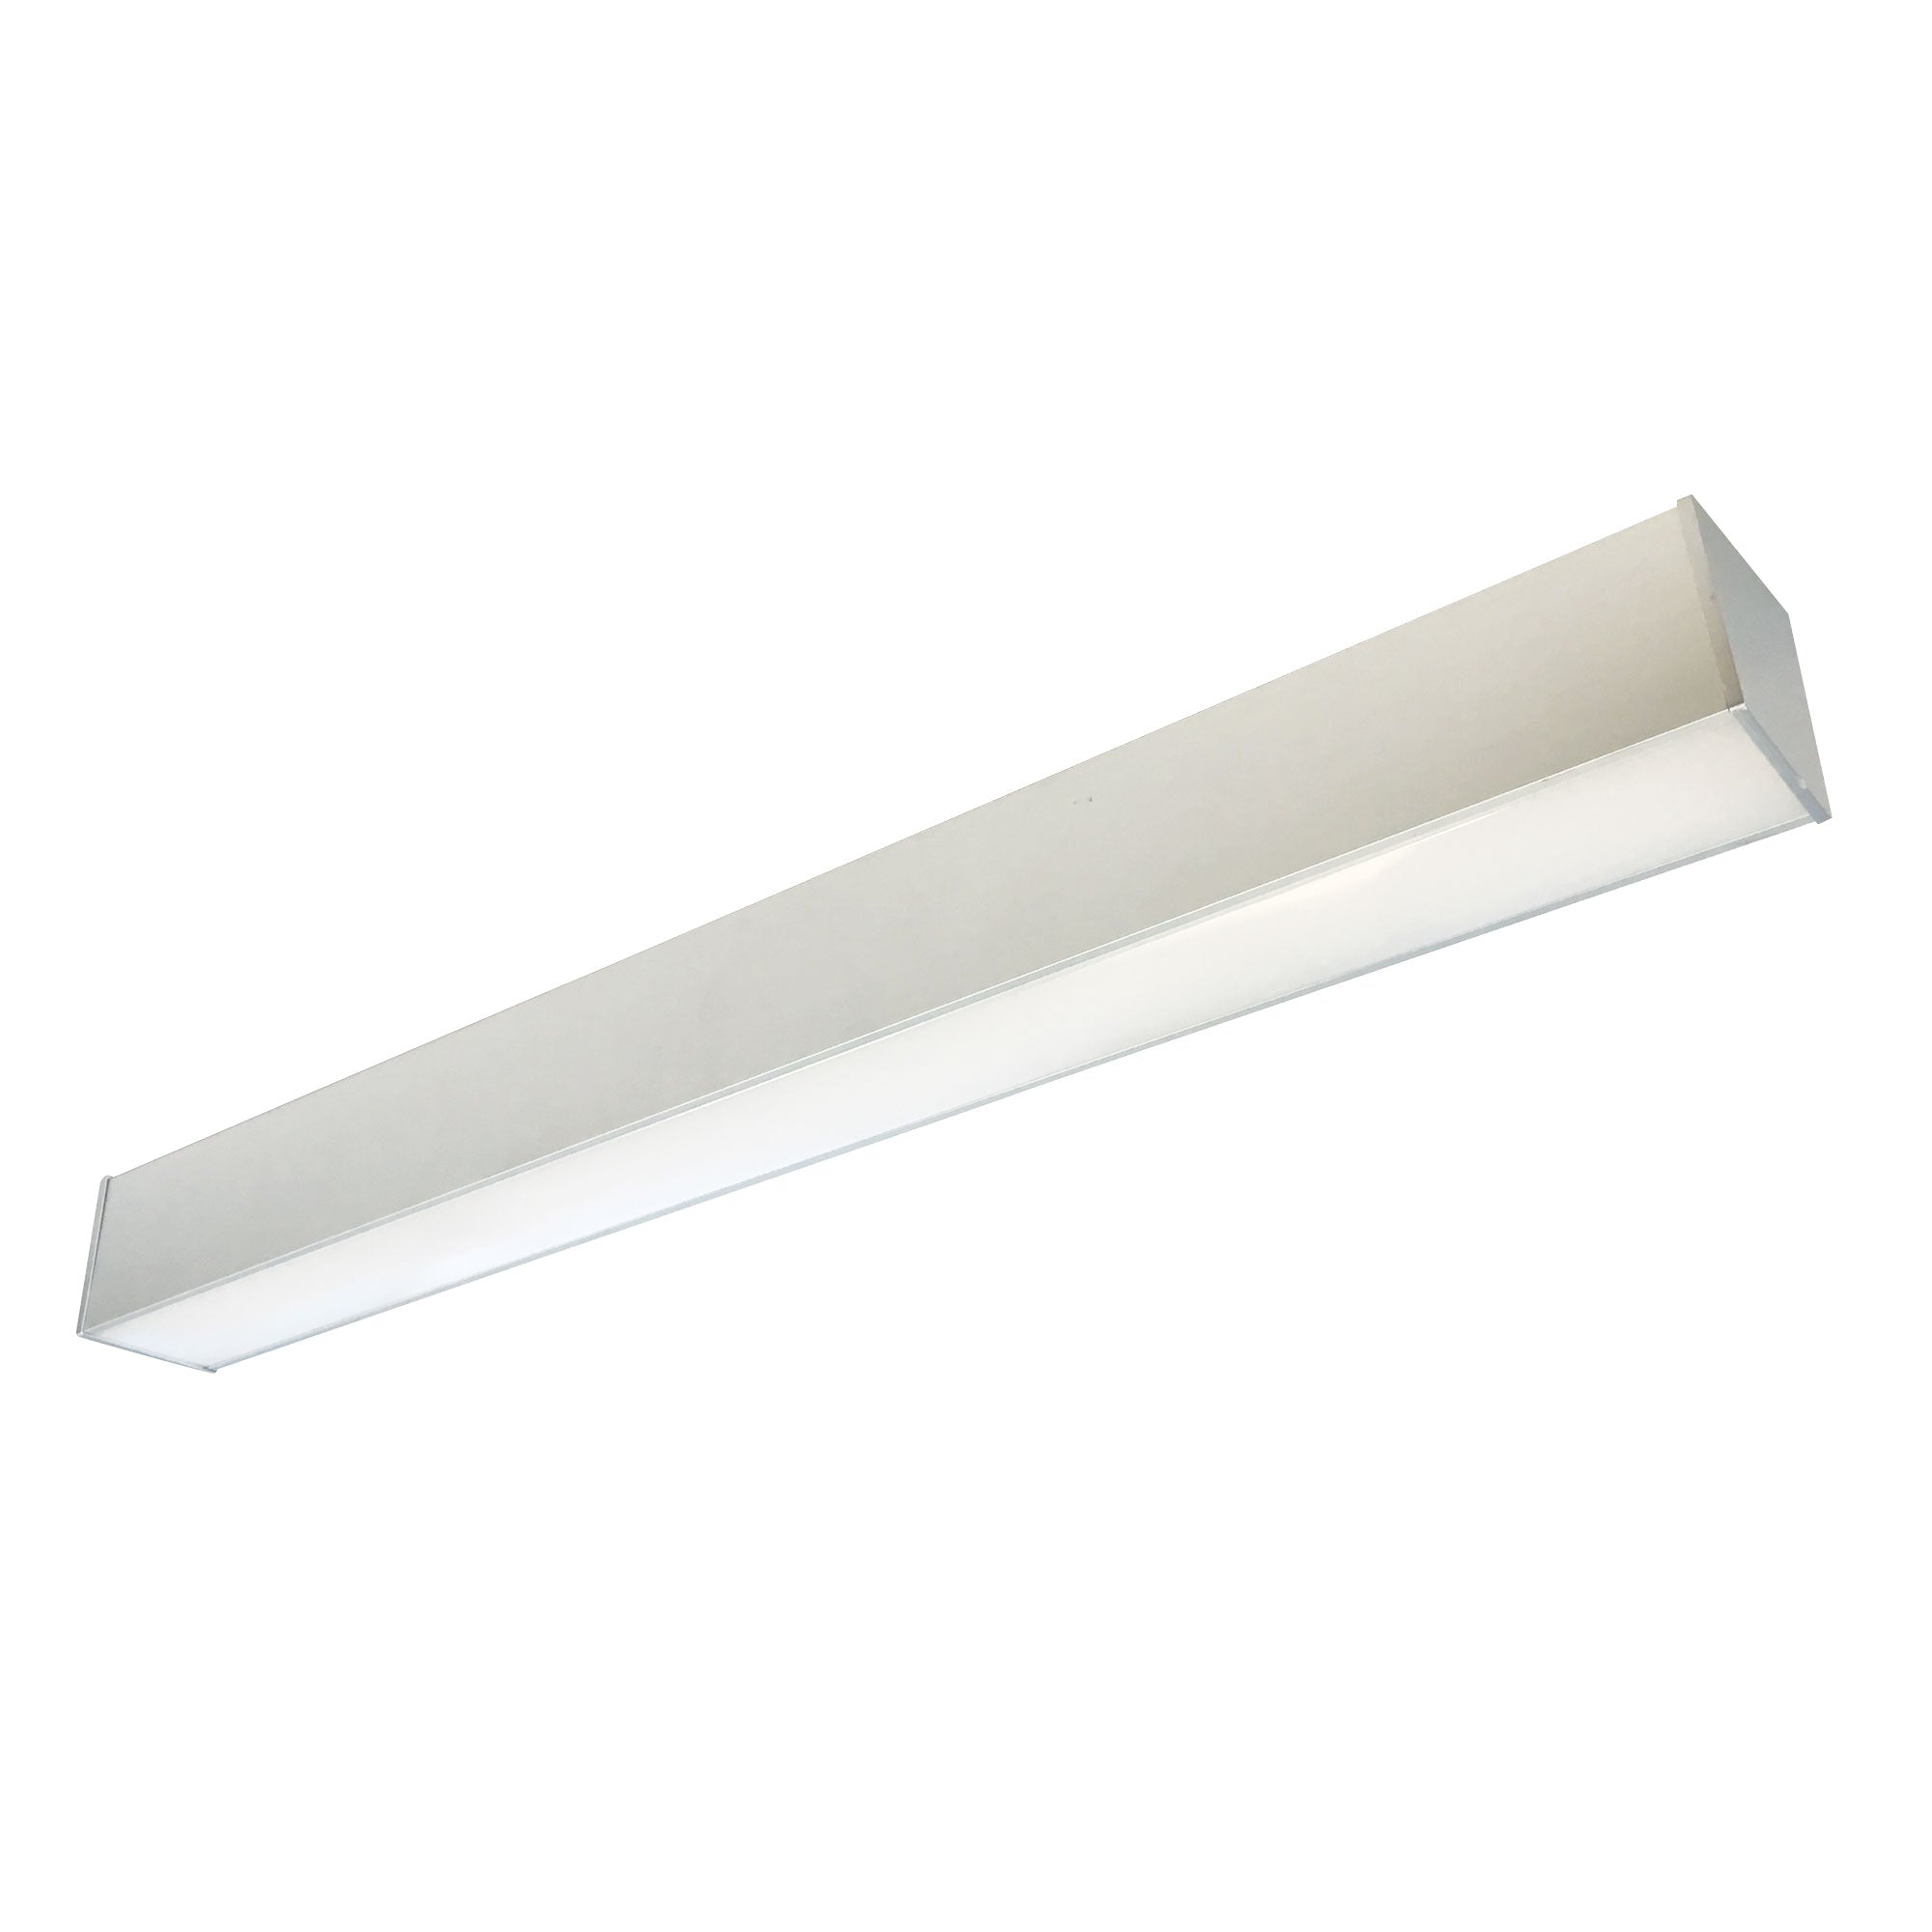 Nora Lighting NLIN-21035A - Linear - 2' L-Line LED Direct Linear w/ Dedicated CCT, 2100lm / 3500K, Aluminum Finish